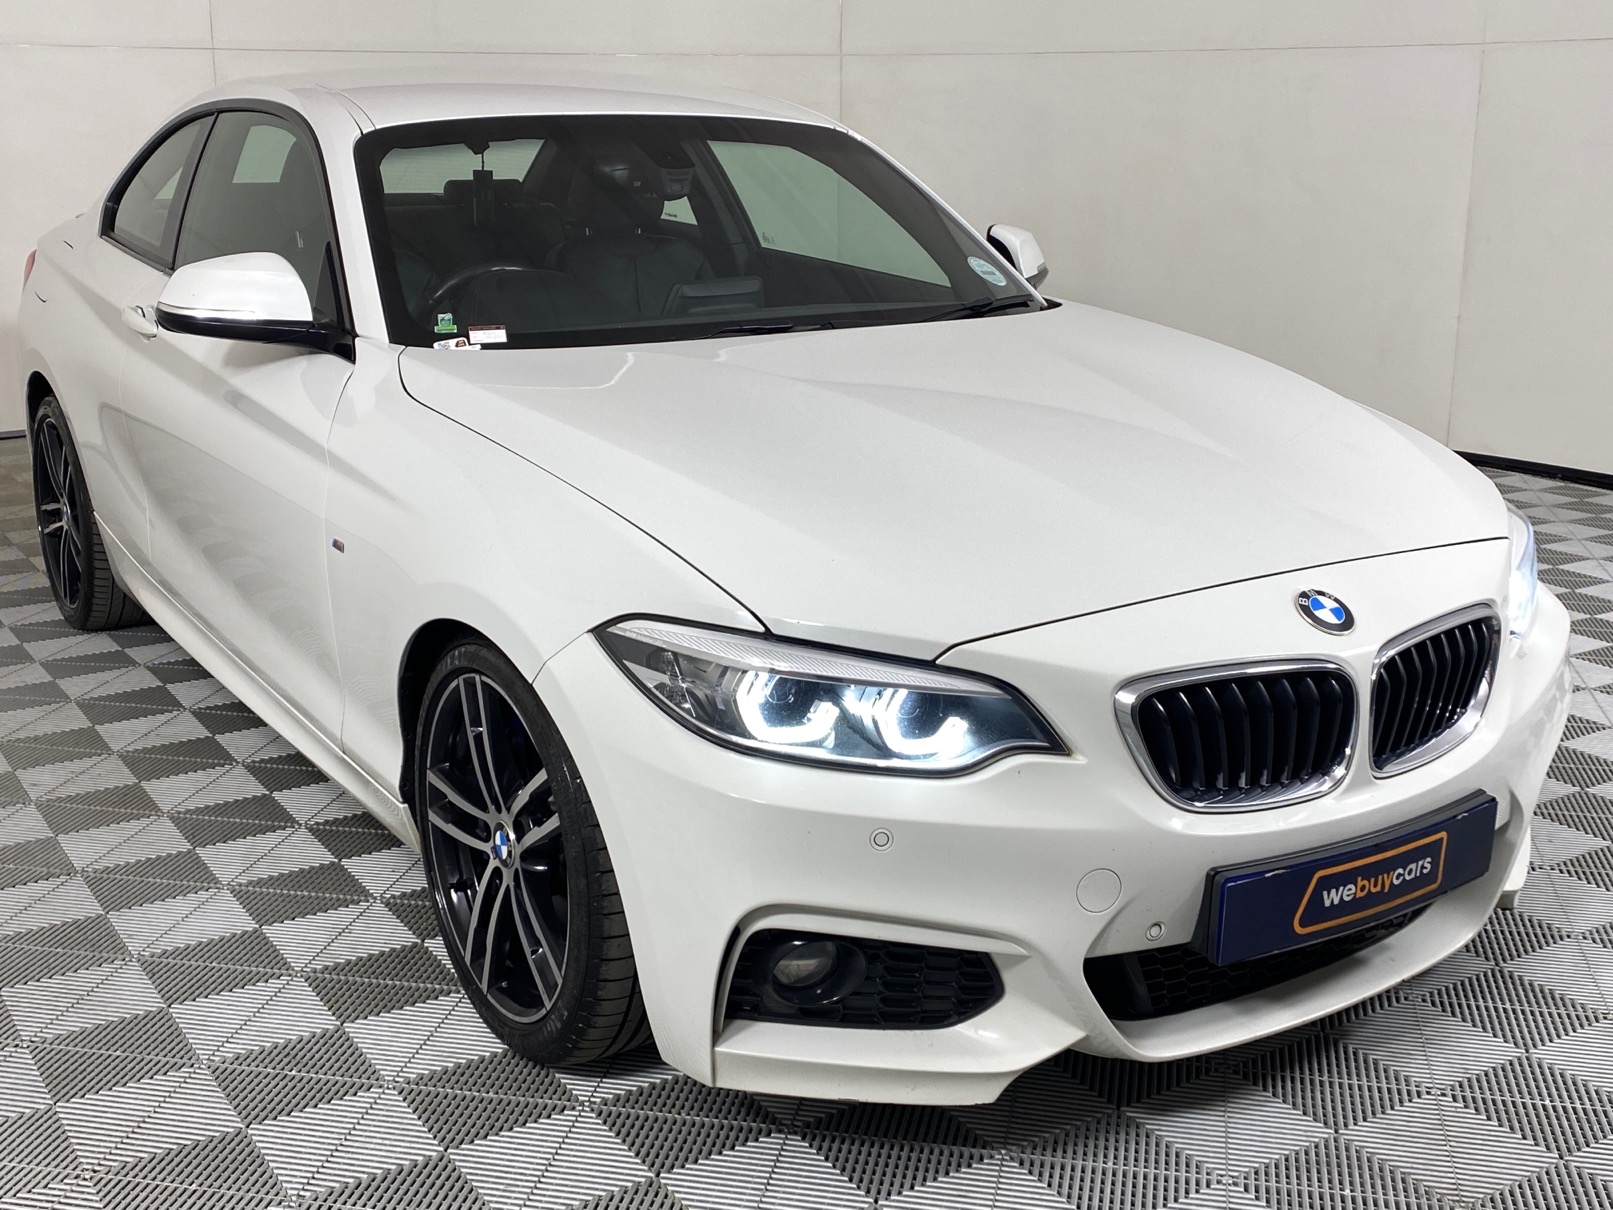 Used 2019 Bmw 2 Series 220d M Sport Auto F22 For Sale Webuycars